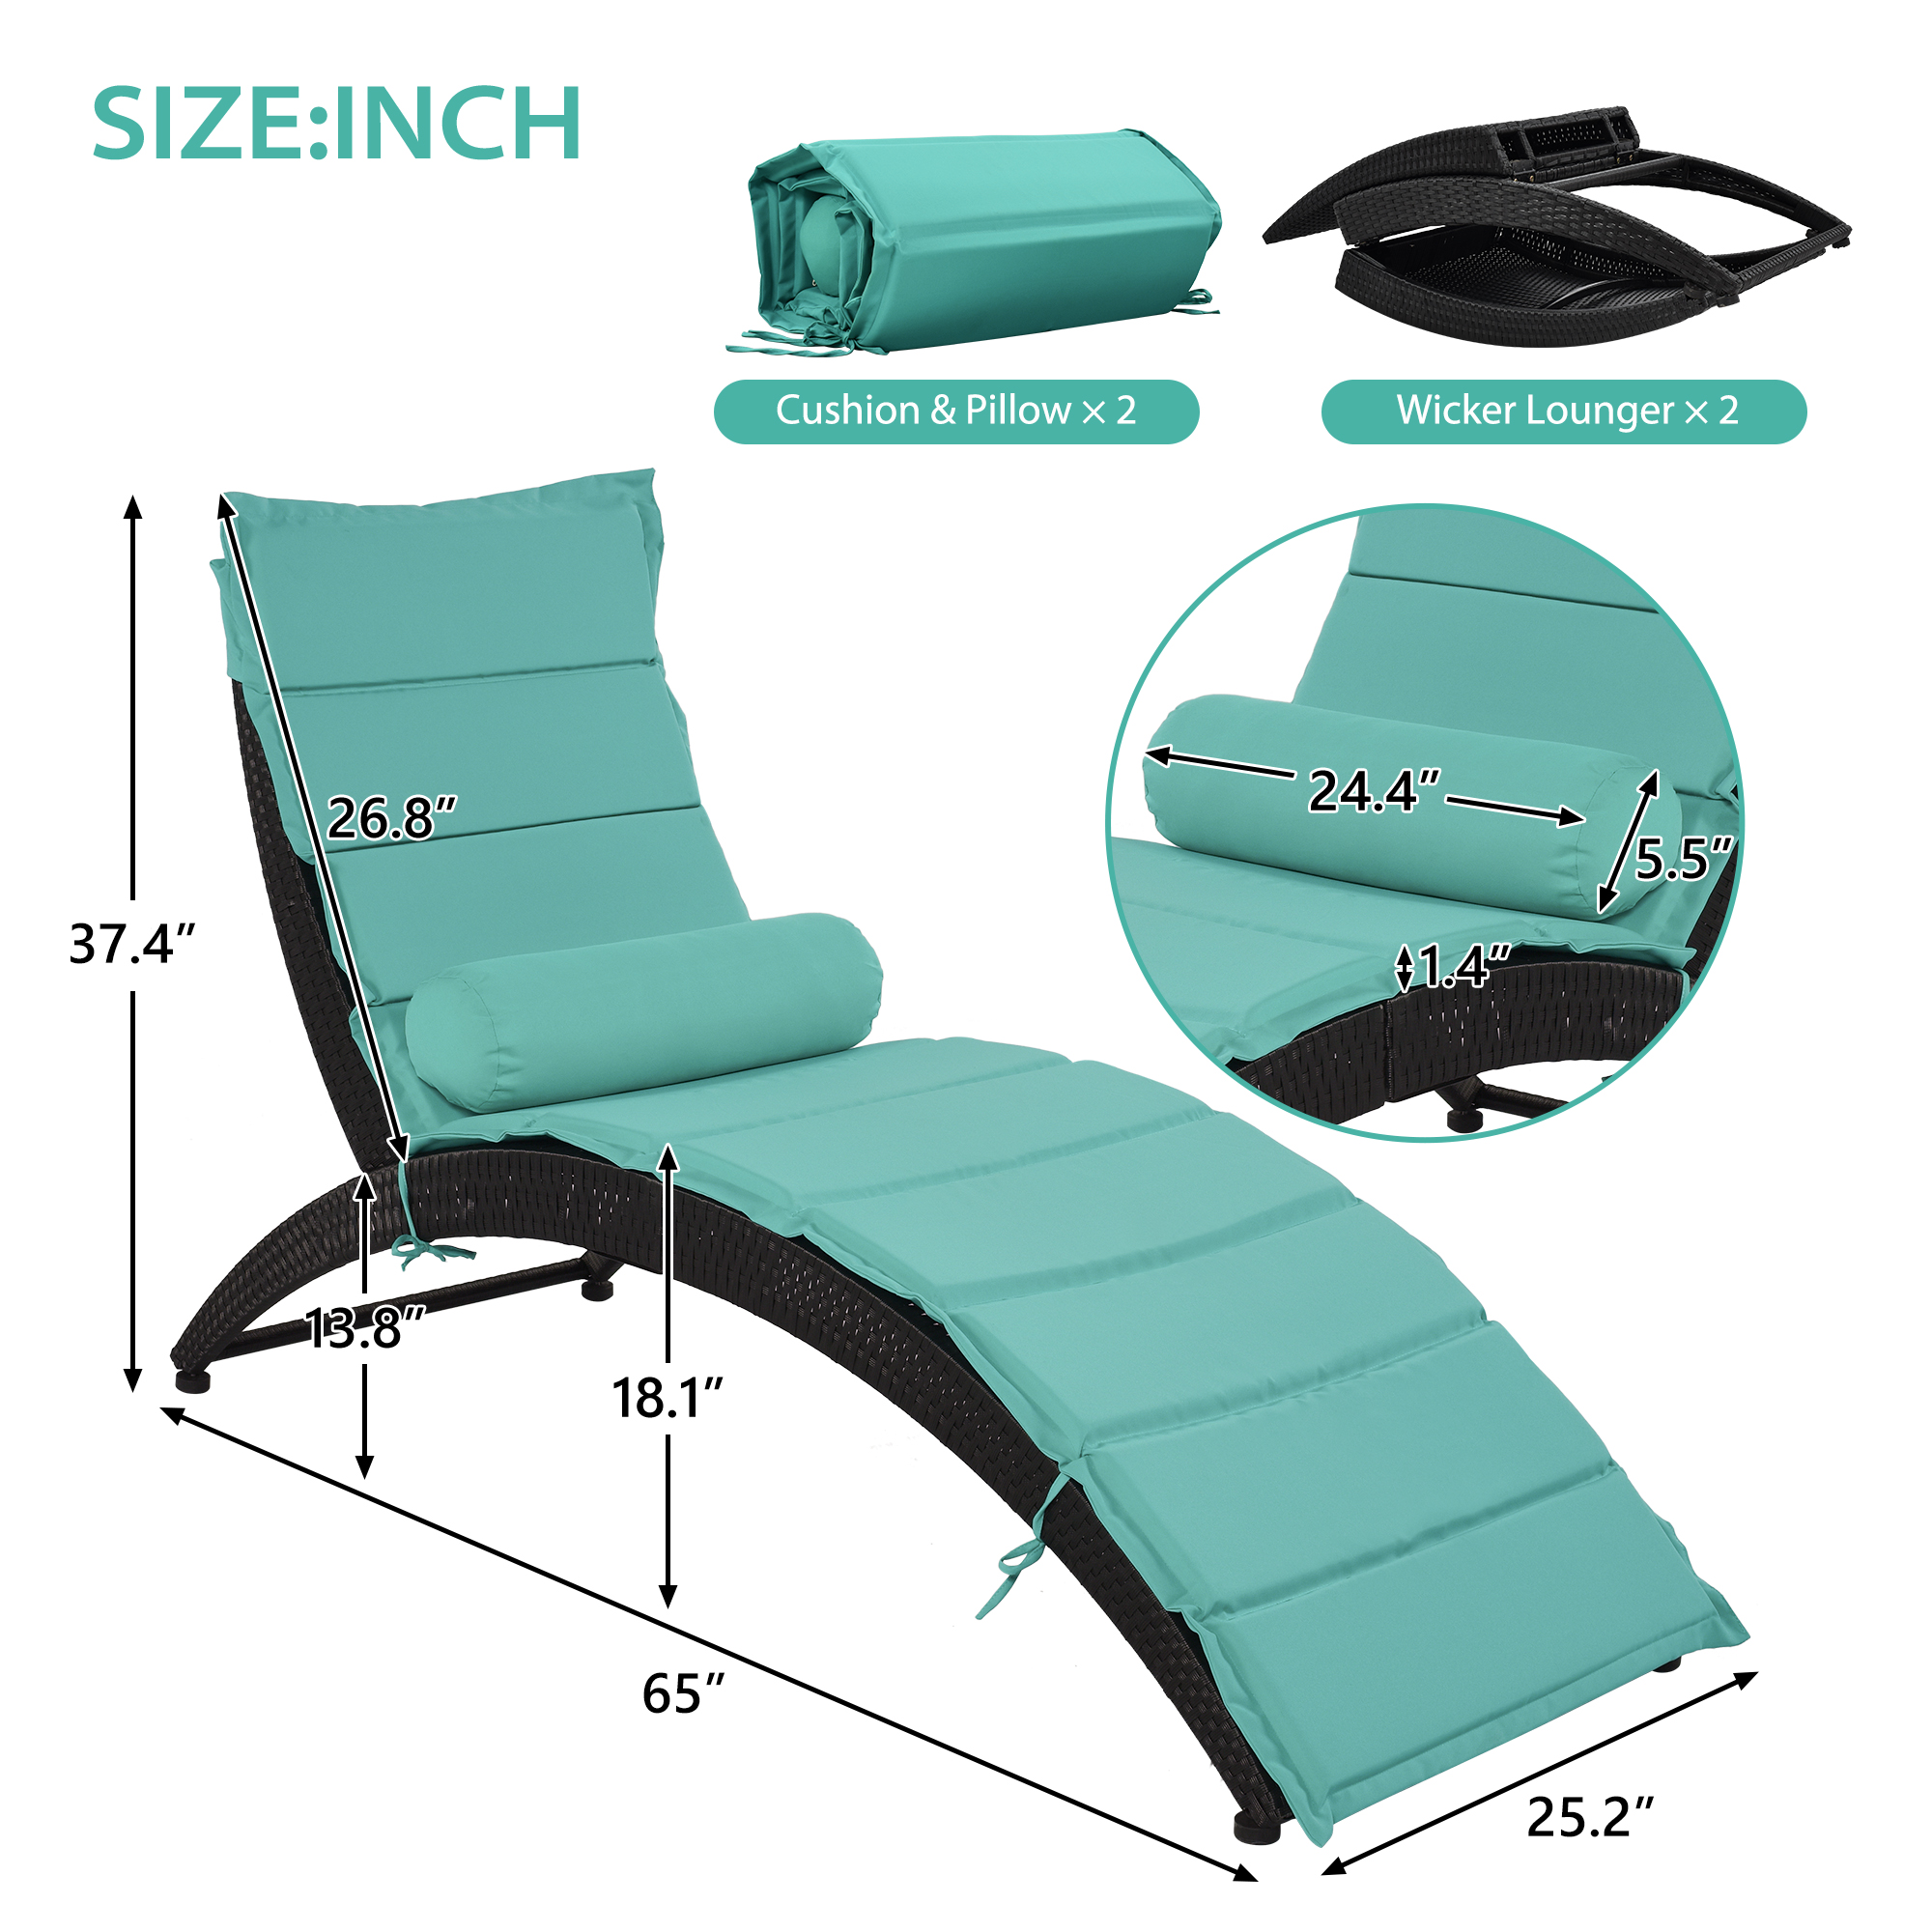 Chaise Lounge Set of 2, Outdoor Lounge Chairs, Chaise Lounge Chairs, Patio Reclining Chair Furniture for Poolside, Deck, Backyard, JA2925 - image 3 of 10